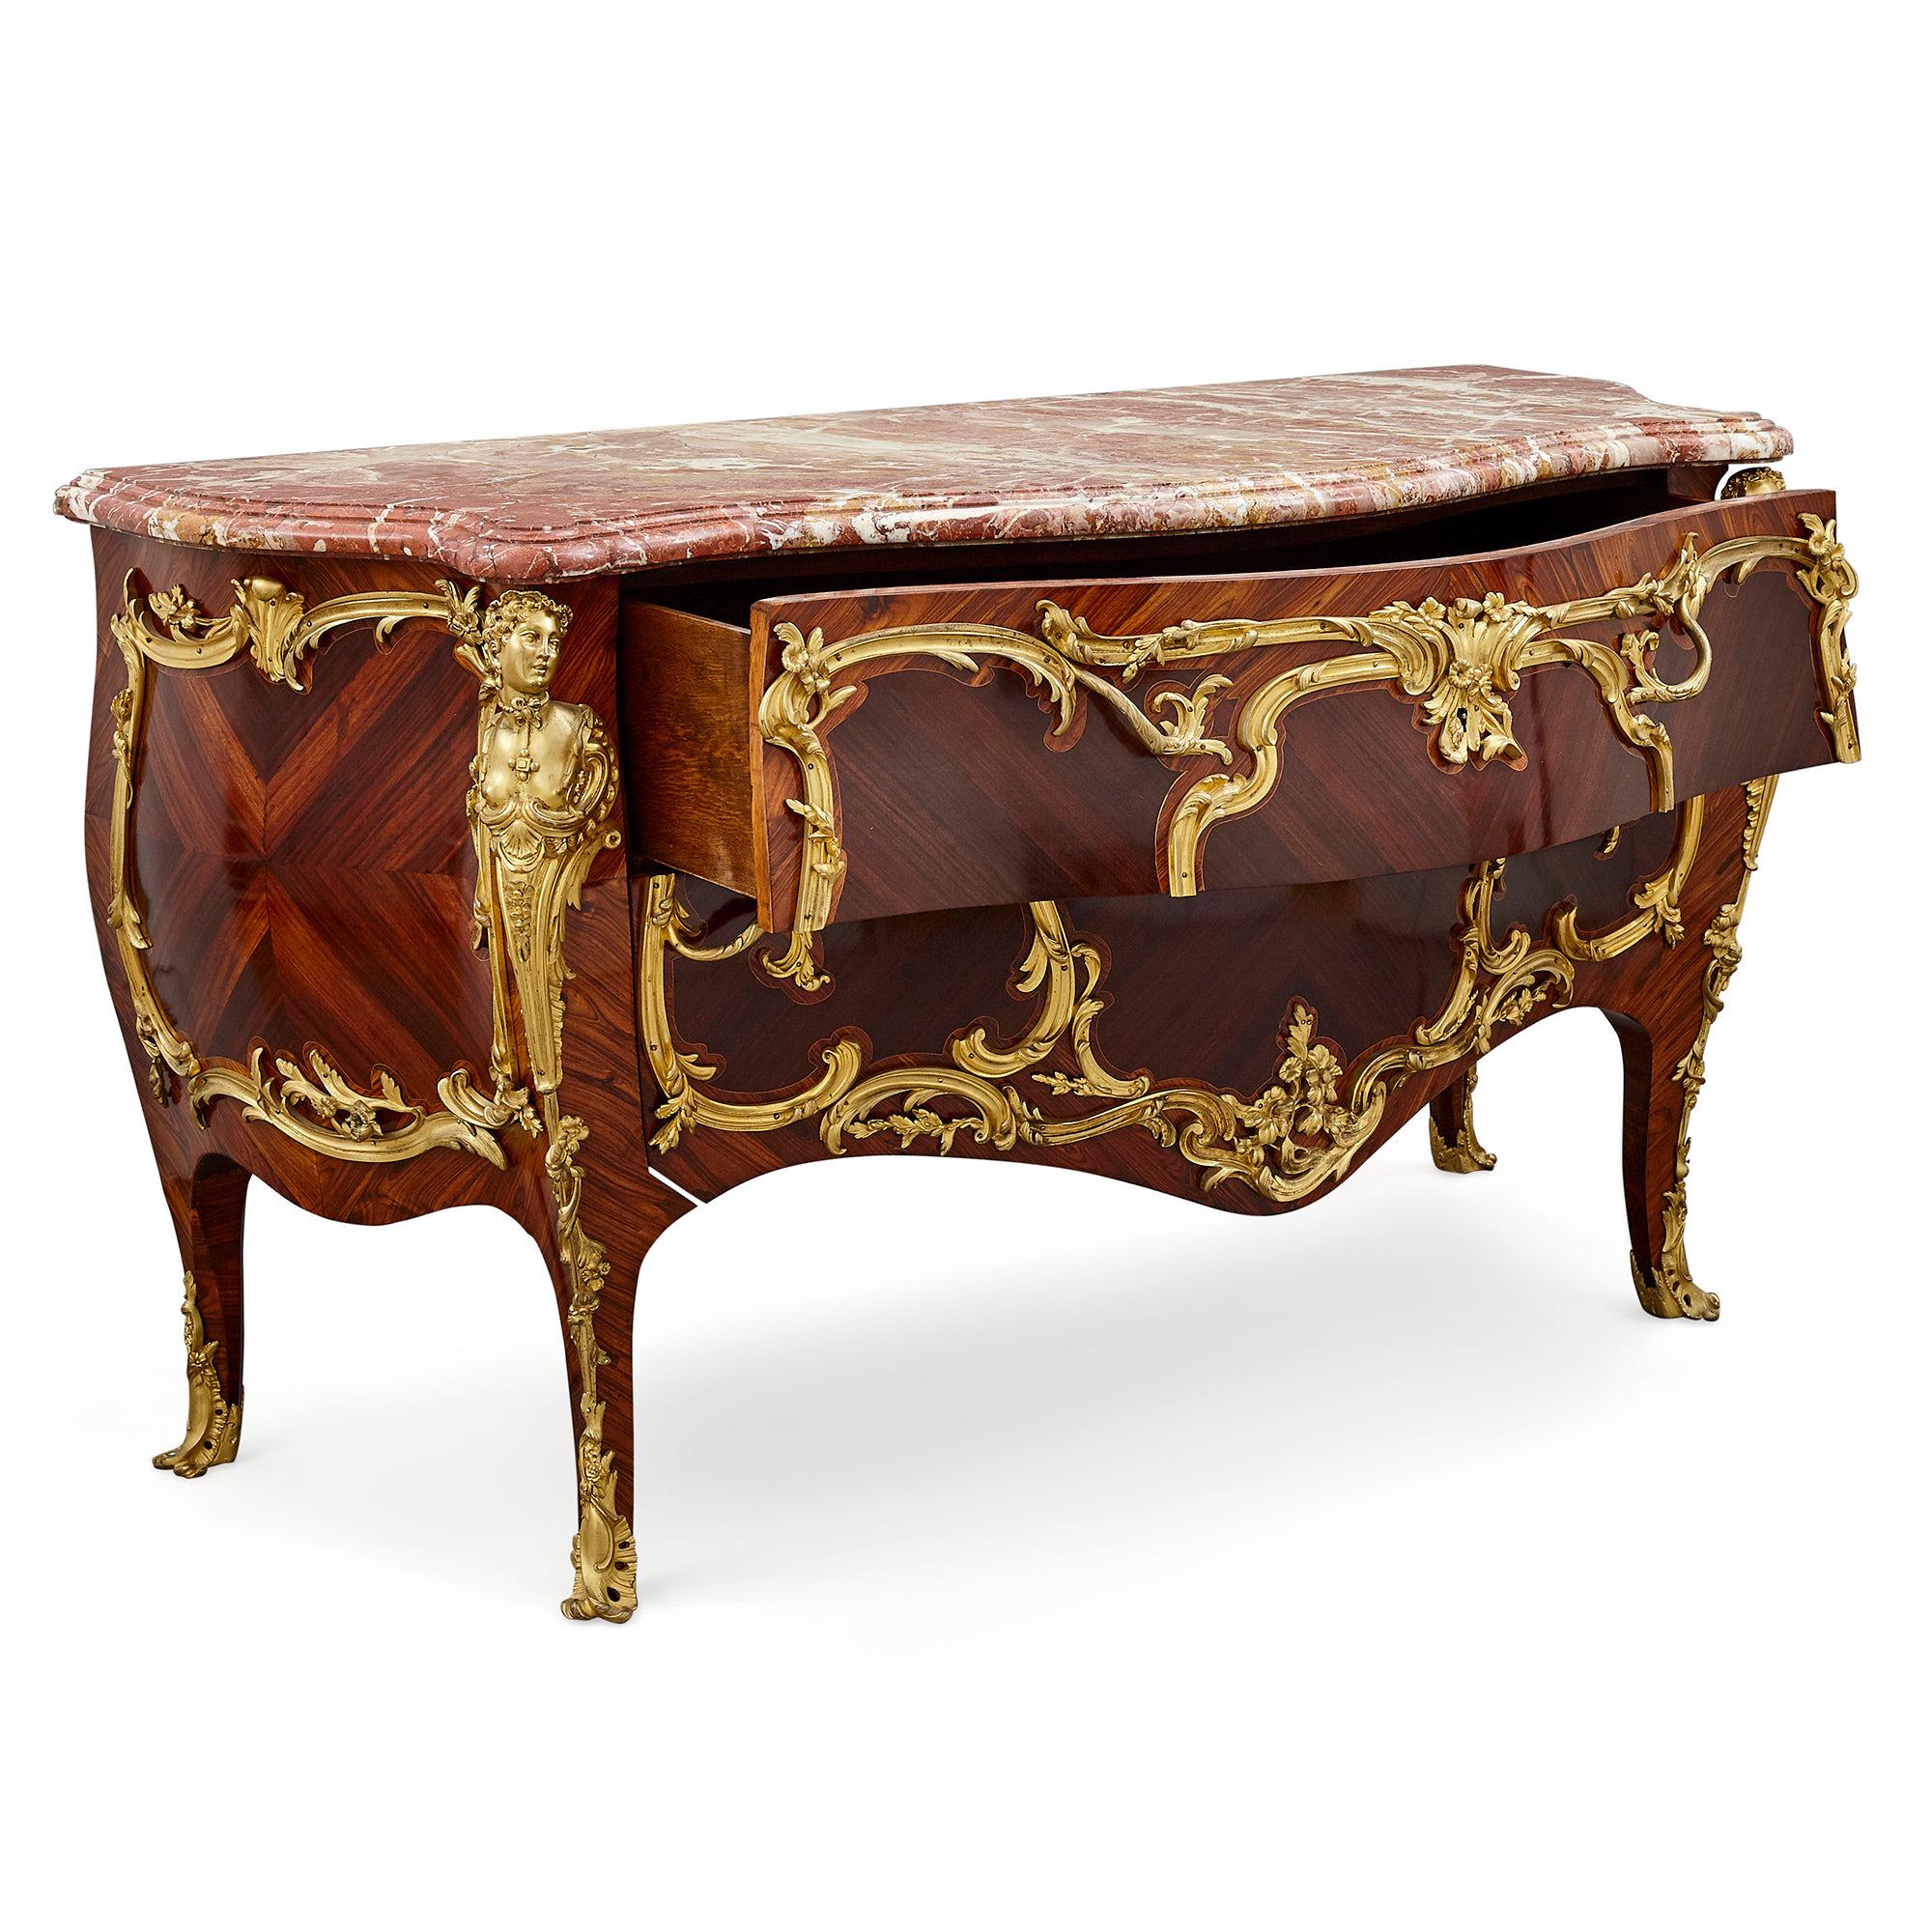 Second Empire period ormolu mounted commode by Sormani
French, c. 1860
Measures: Height 86cm, width 151cm, depth 65cm

This superb commode is by the celebrated French ébéniste Paul Sormani. The commode is of bombe shape, with a serpentine marble